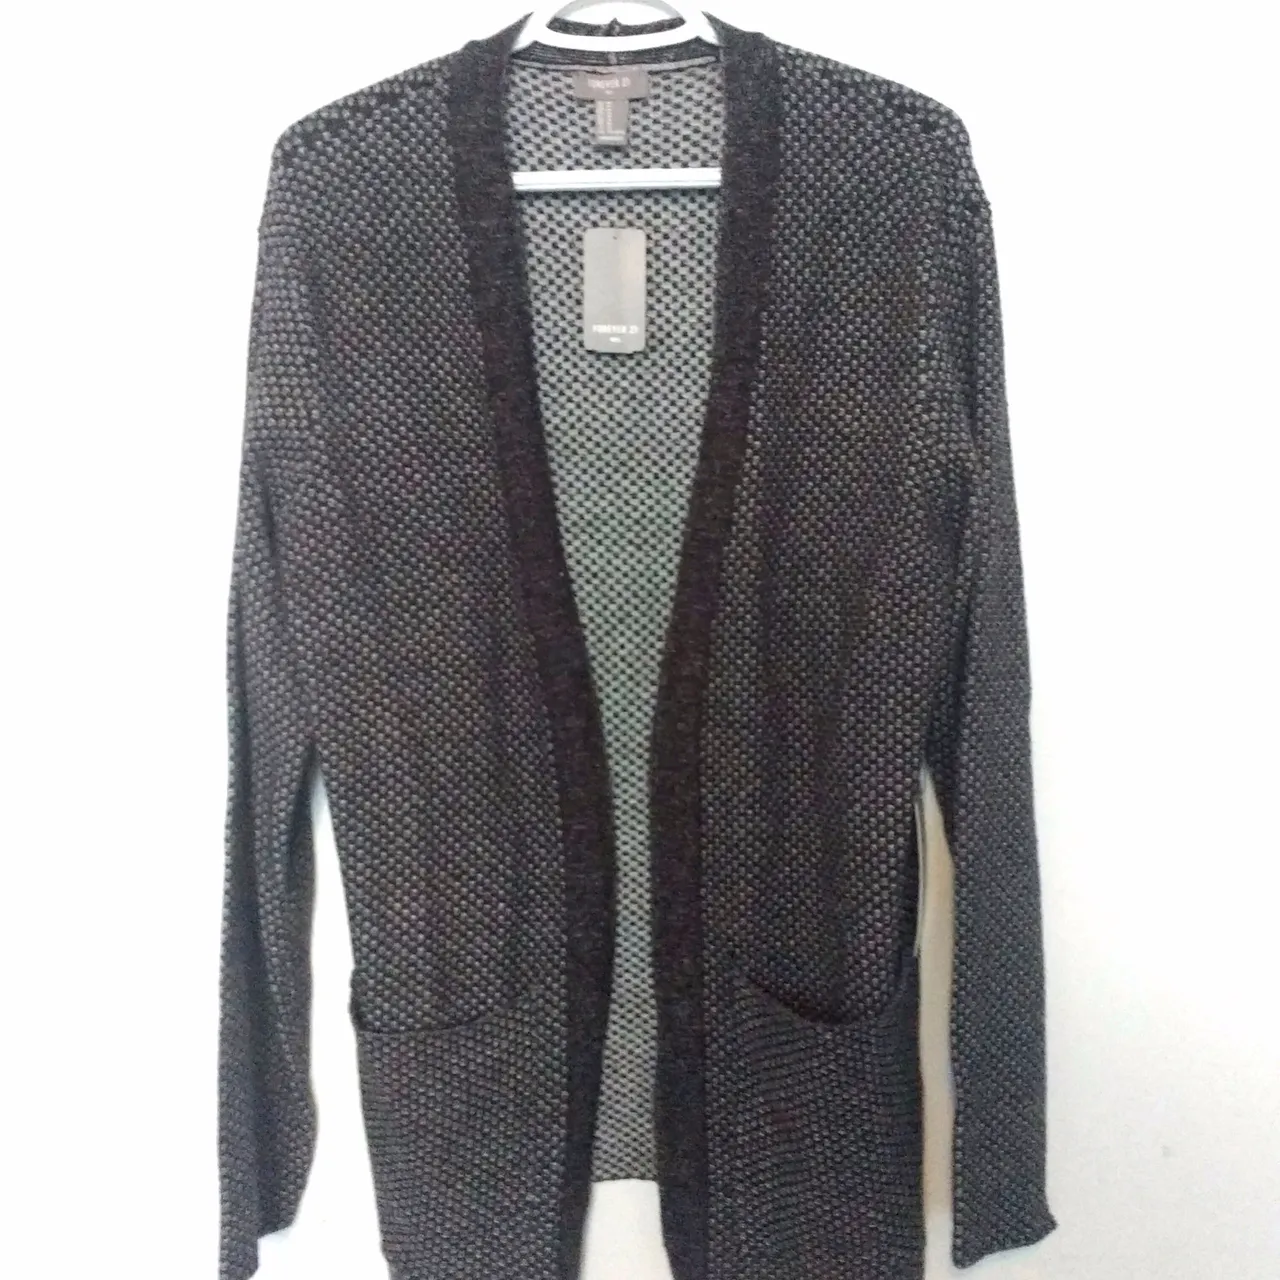 Men's New With Tags Cardigan photo 4